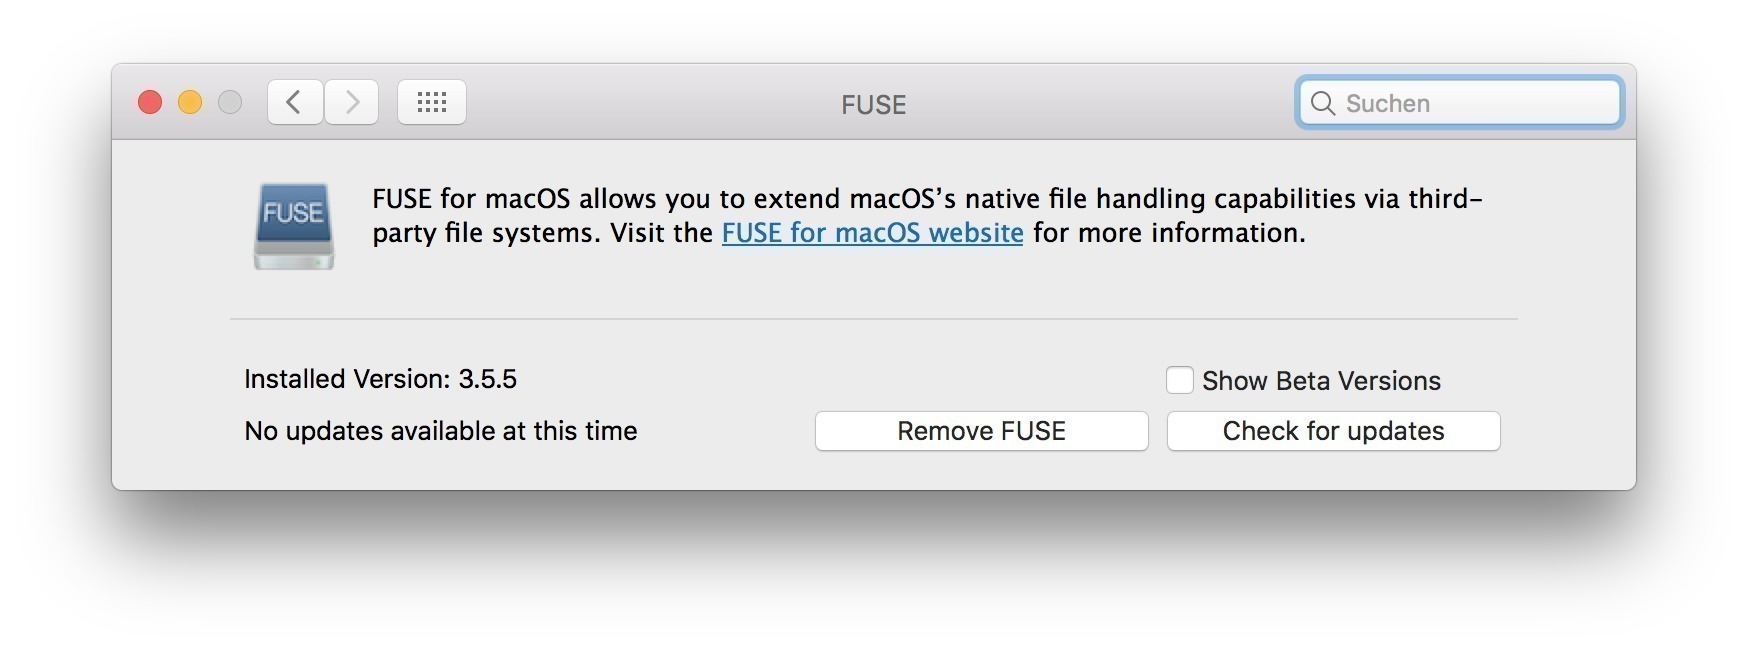 fuse for macos 3.10.2